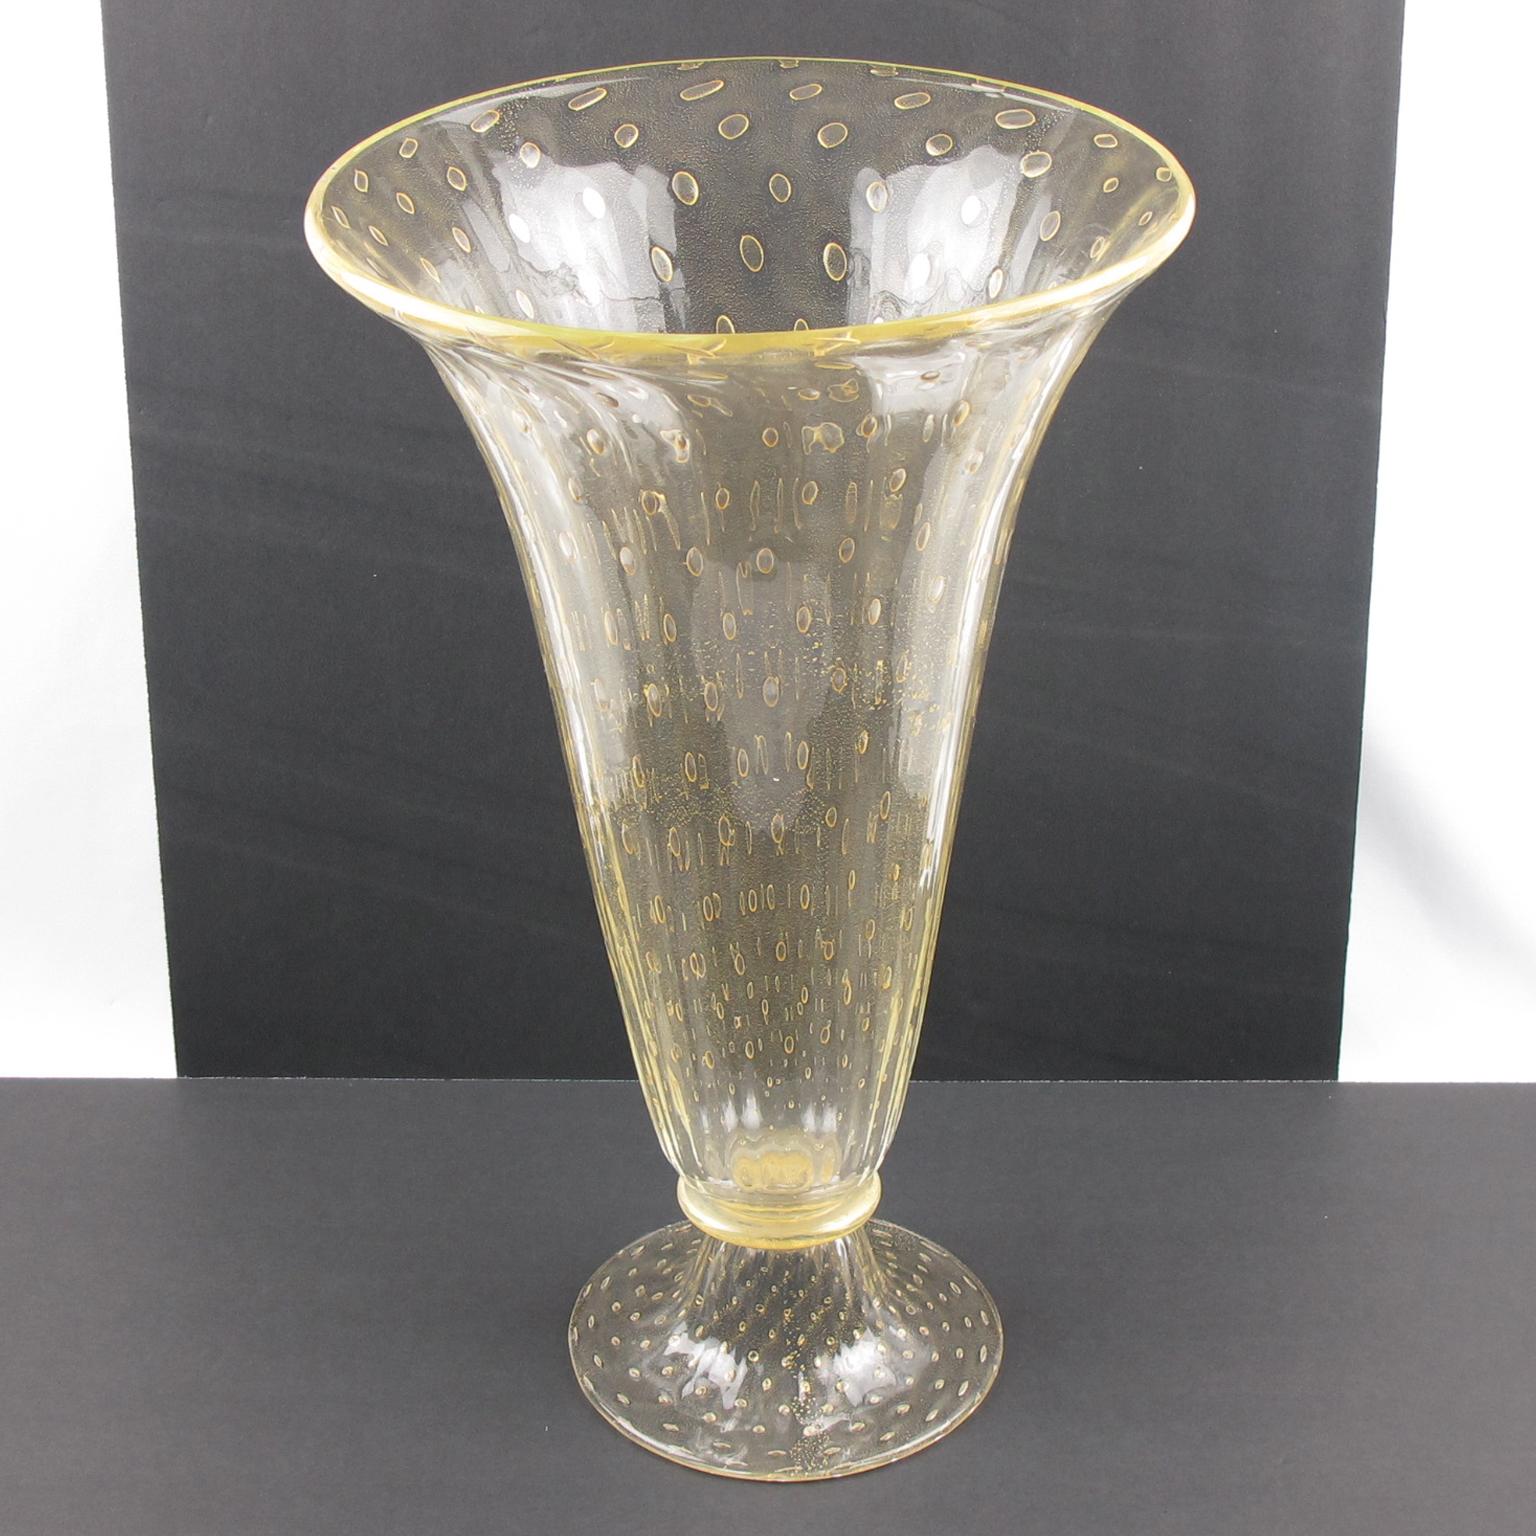 Beautiful hand blown Italian Art glass vase by Serenella Arte, Murano. Extra tall sculptural tulip shape with infused gold flakes inclusions and 'bollicine' technique (inclusions of tiny air bubbles). Avventurina is a specific process developed by